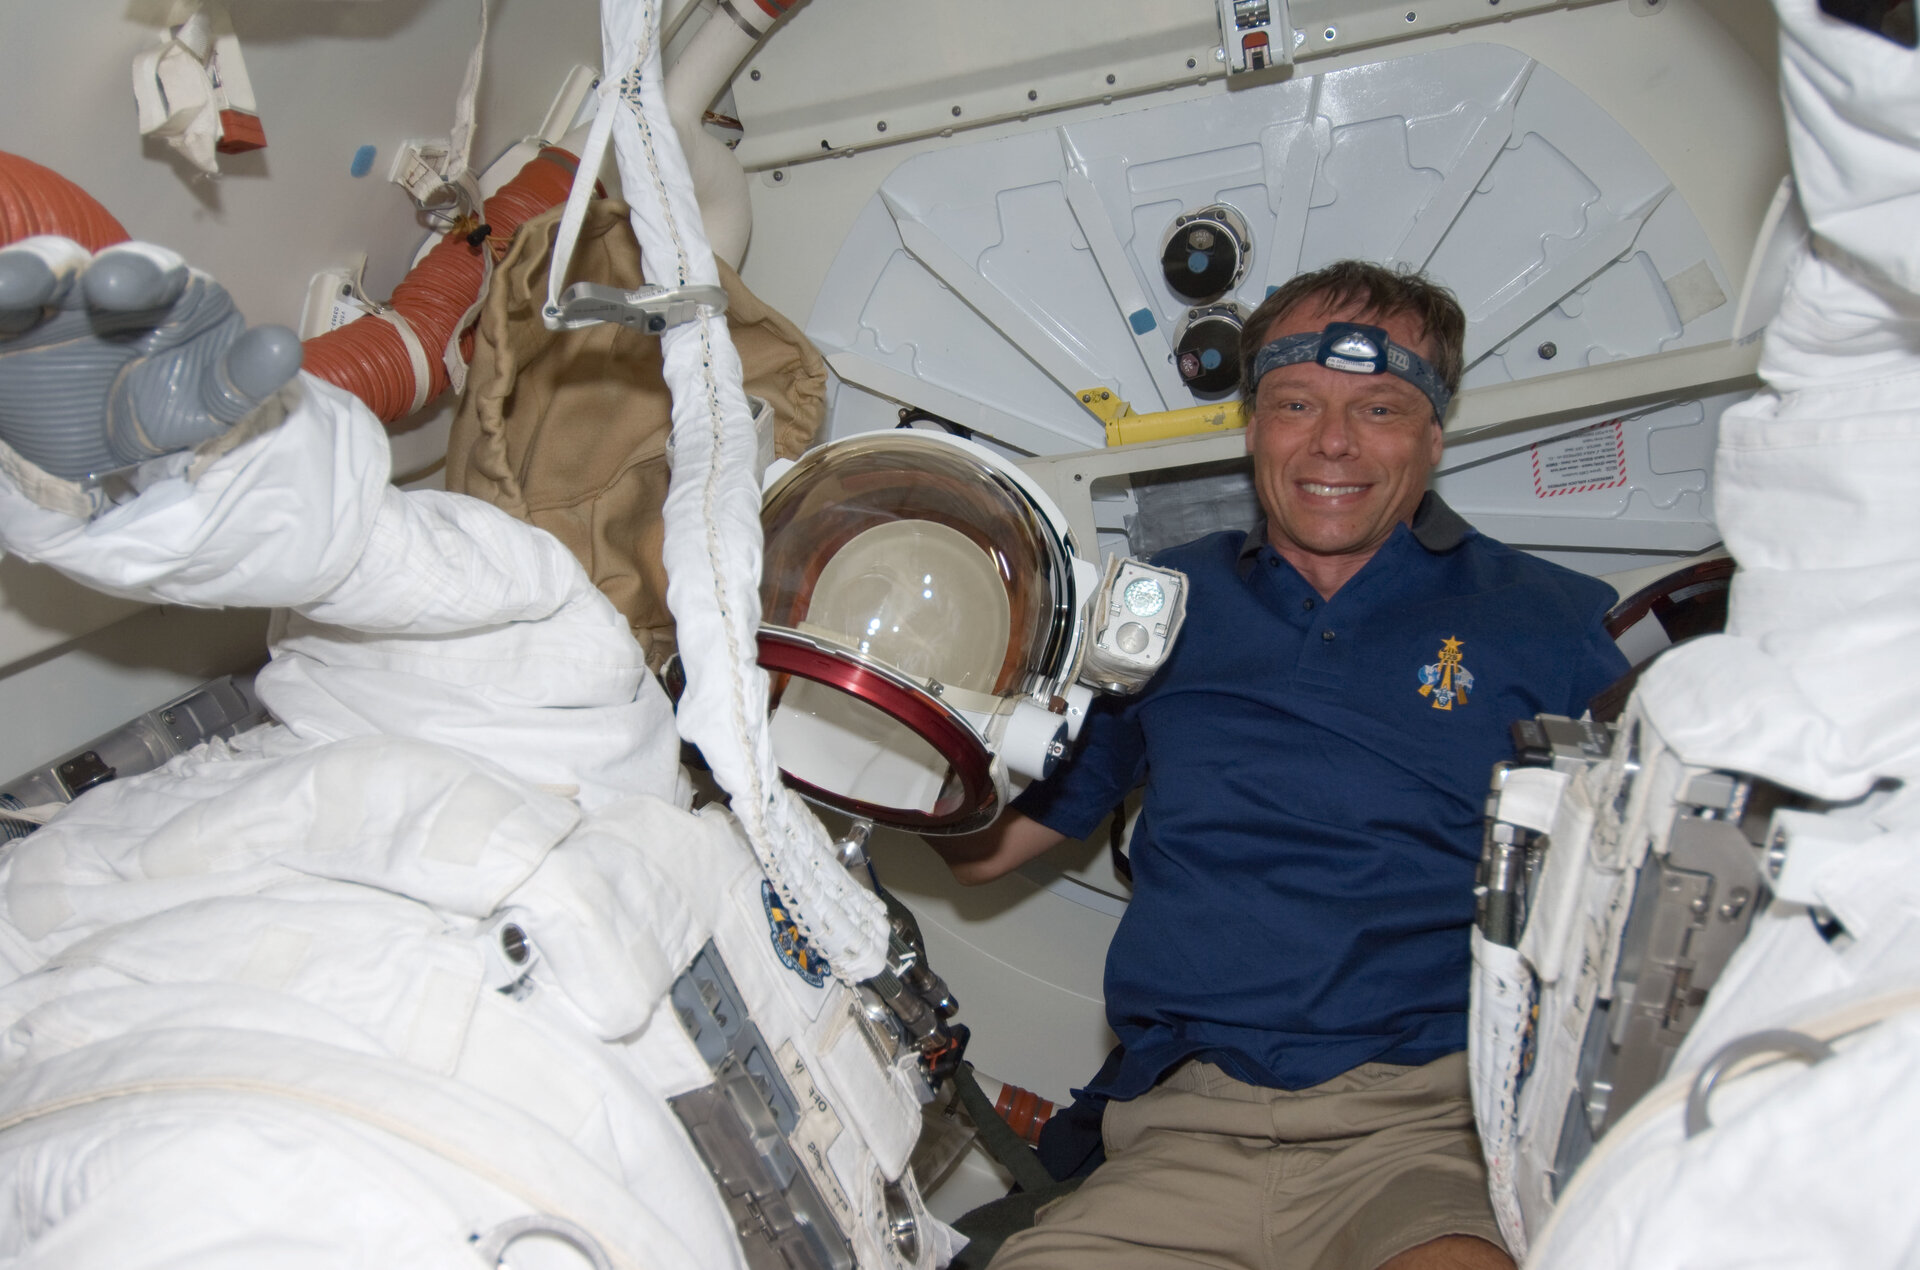 ESA astronaut Christer Fuglesang during STS-128 mission